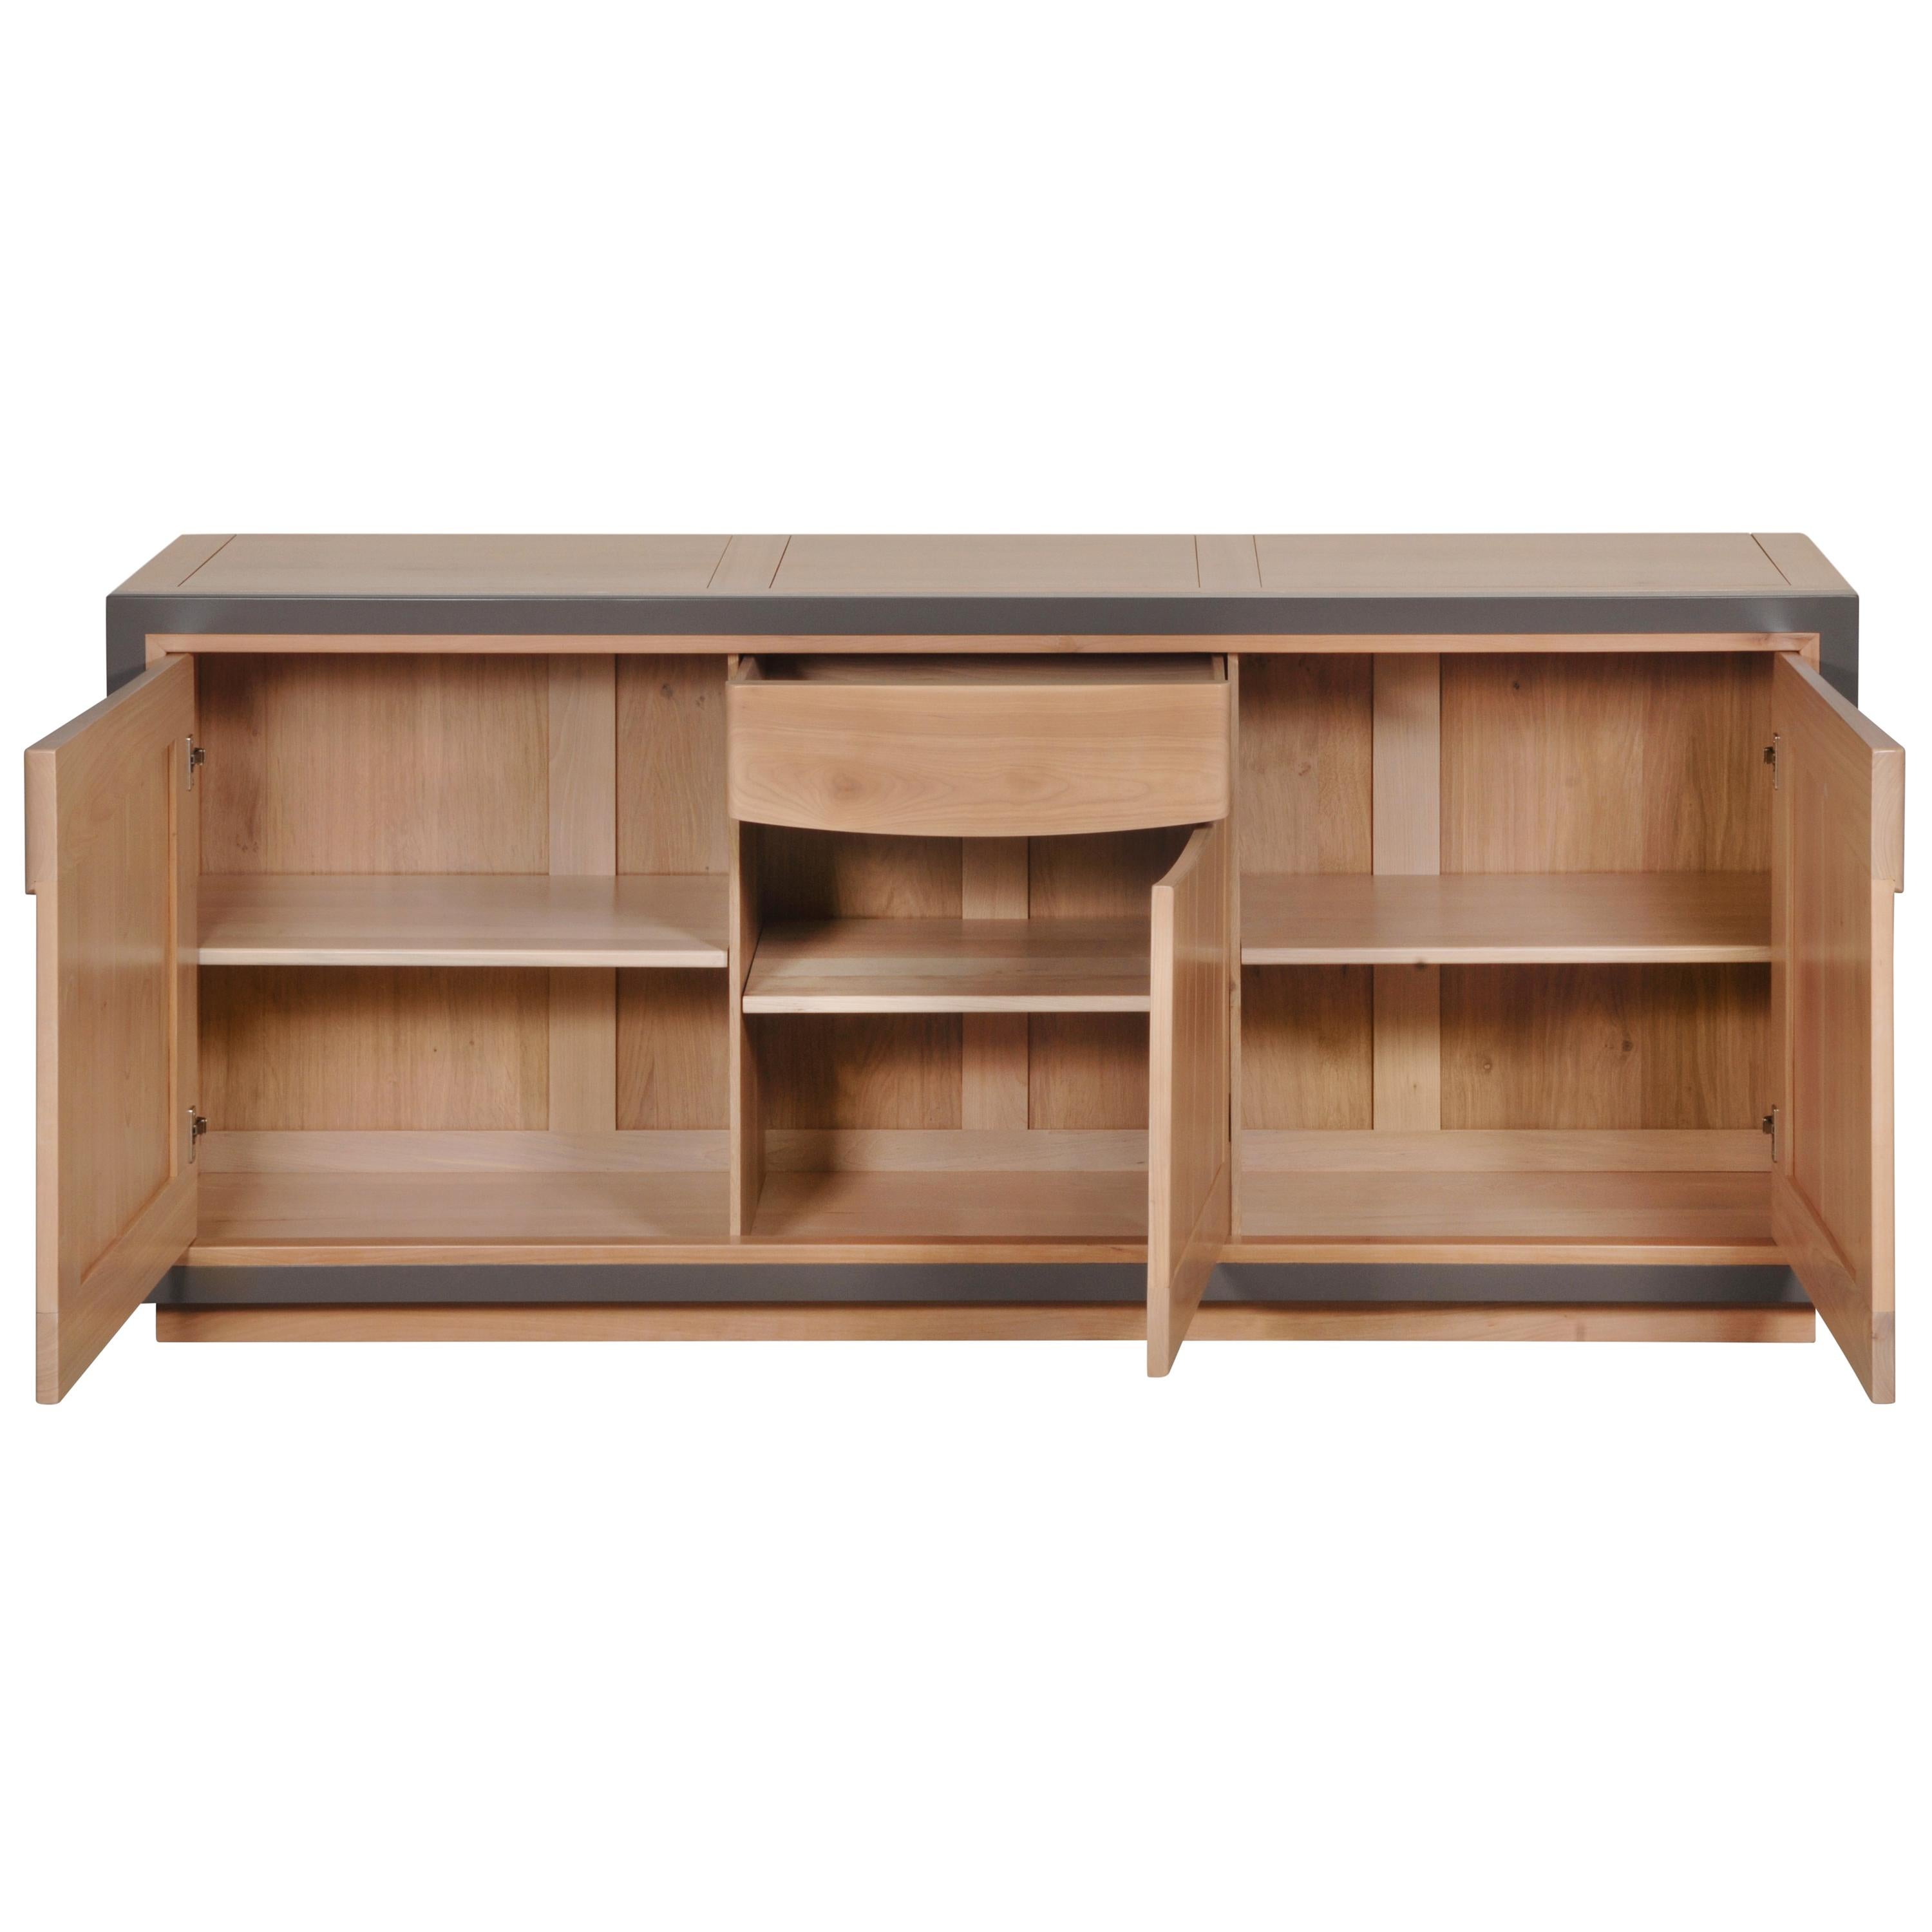 This 3 doors sideboard is made of Cherry wood and designed by Christophe Lecomte a French Designer. Christophe likes to combine right contemporary frames for this sideboard with smooths curves for the handles and the drawer.

The central drawer